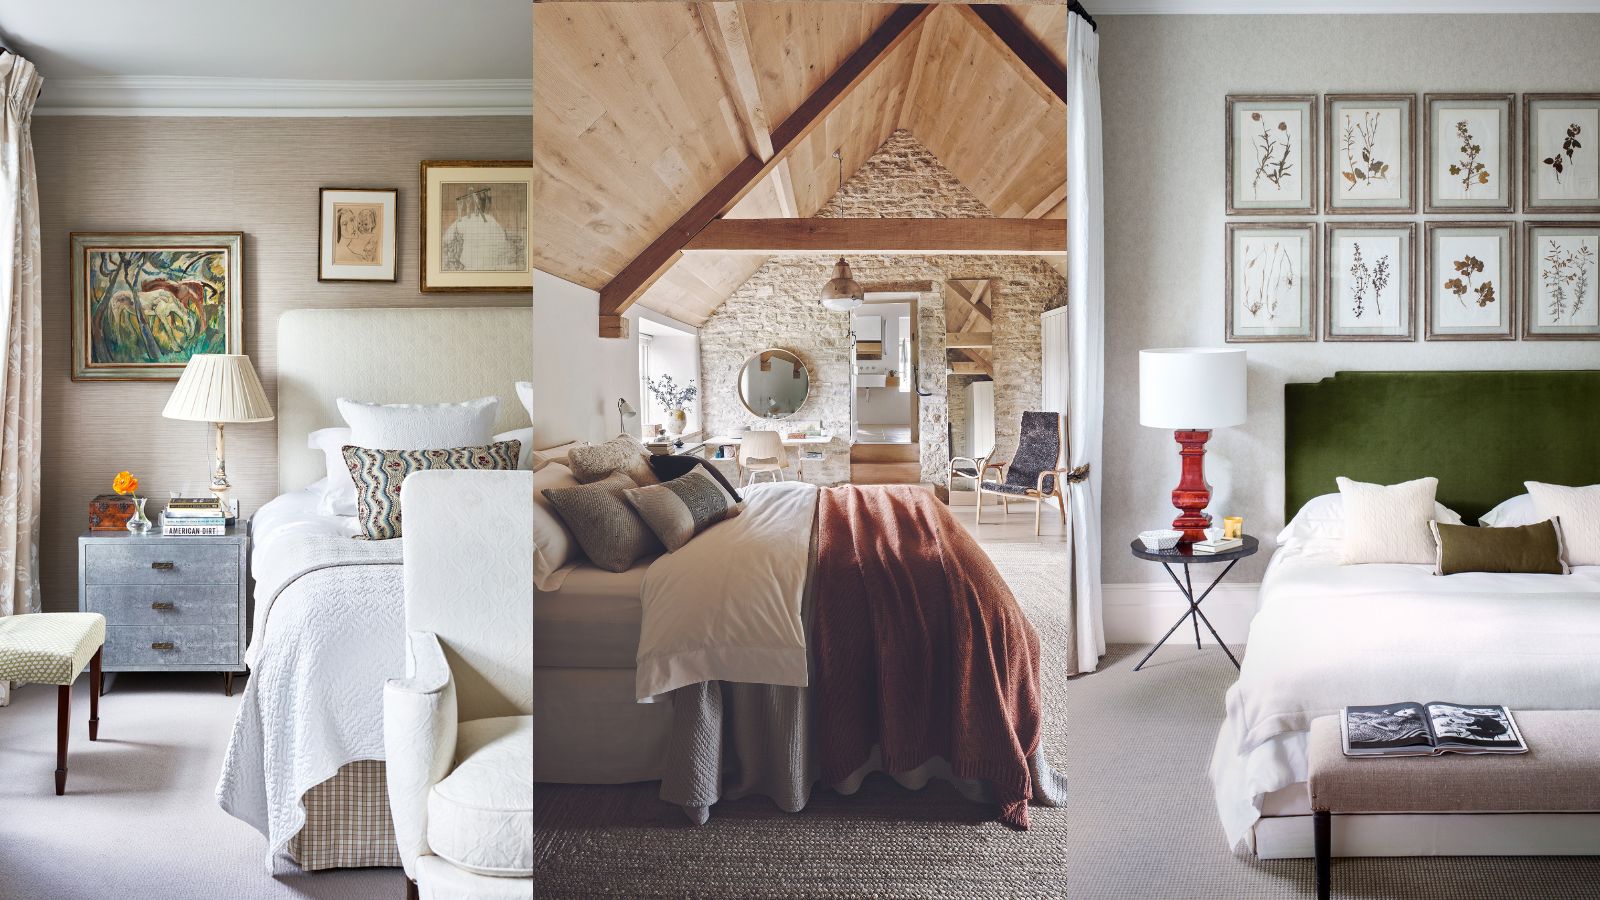 Bedroom Layout Ideas: 15 Ways To Make The Most Of Your Space |